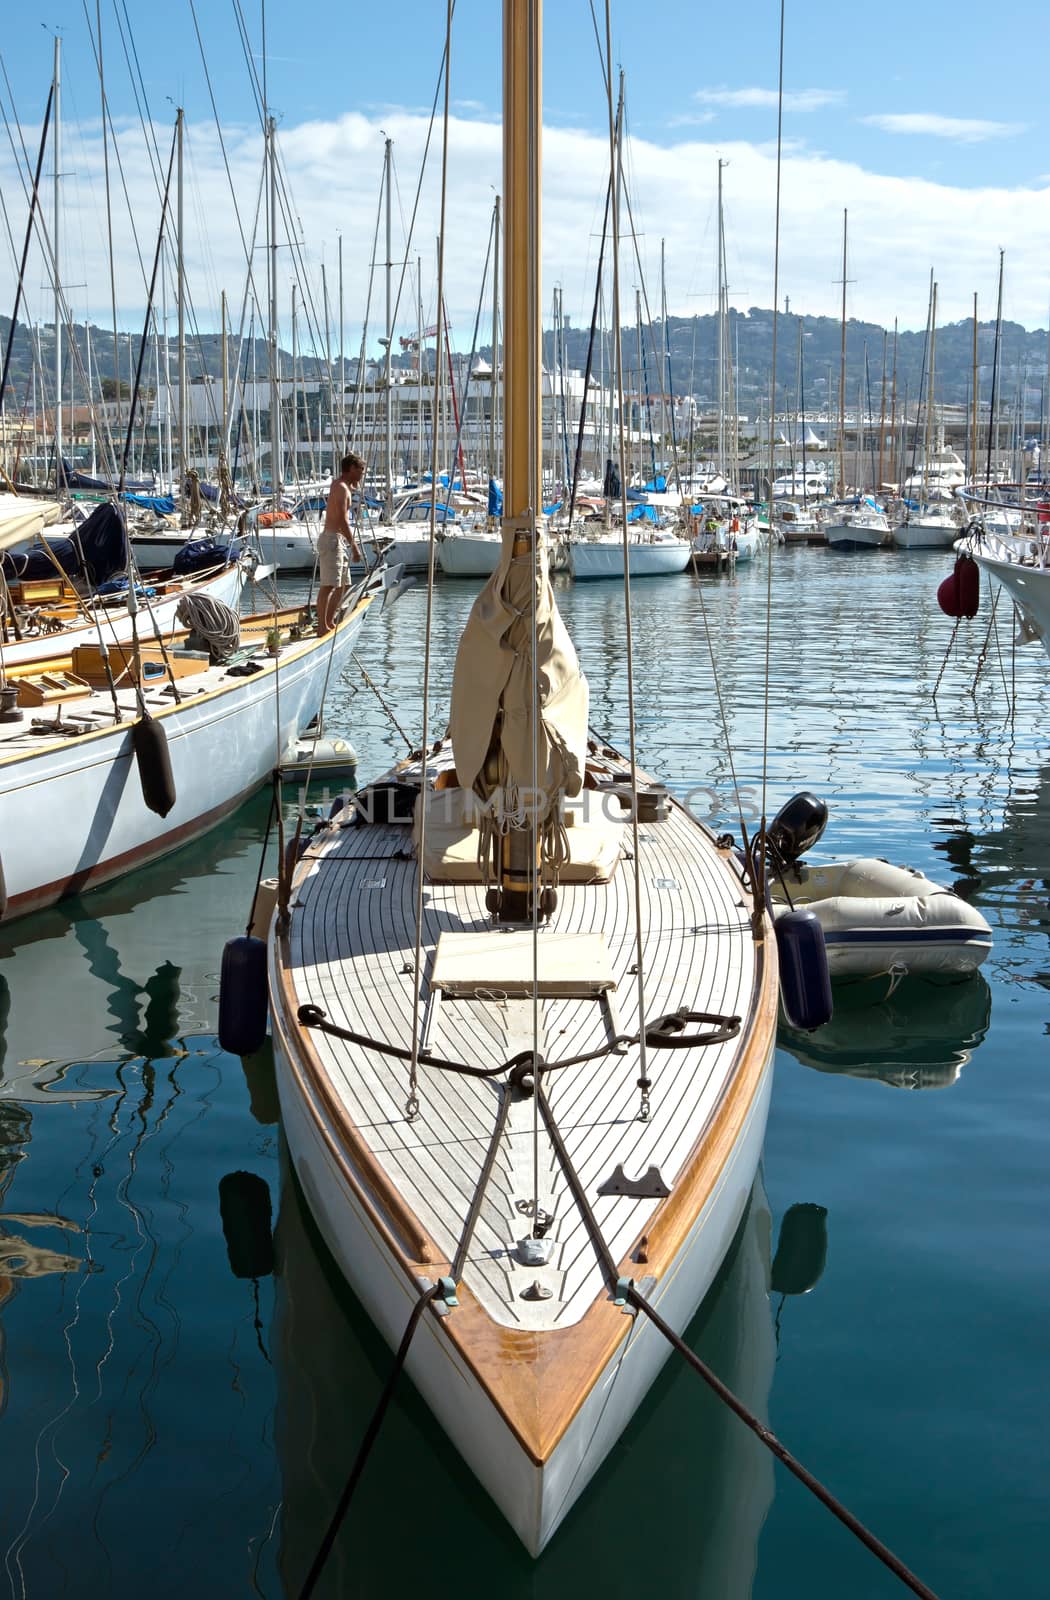 Cannes - Boats in harbor  by Venakr